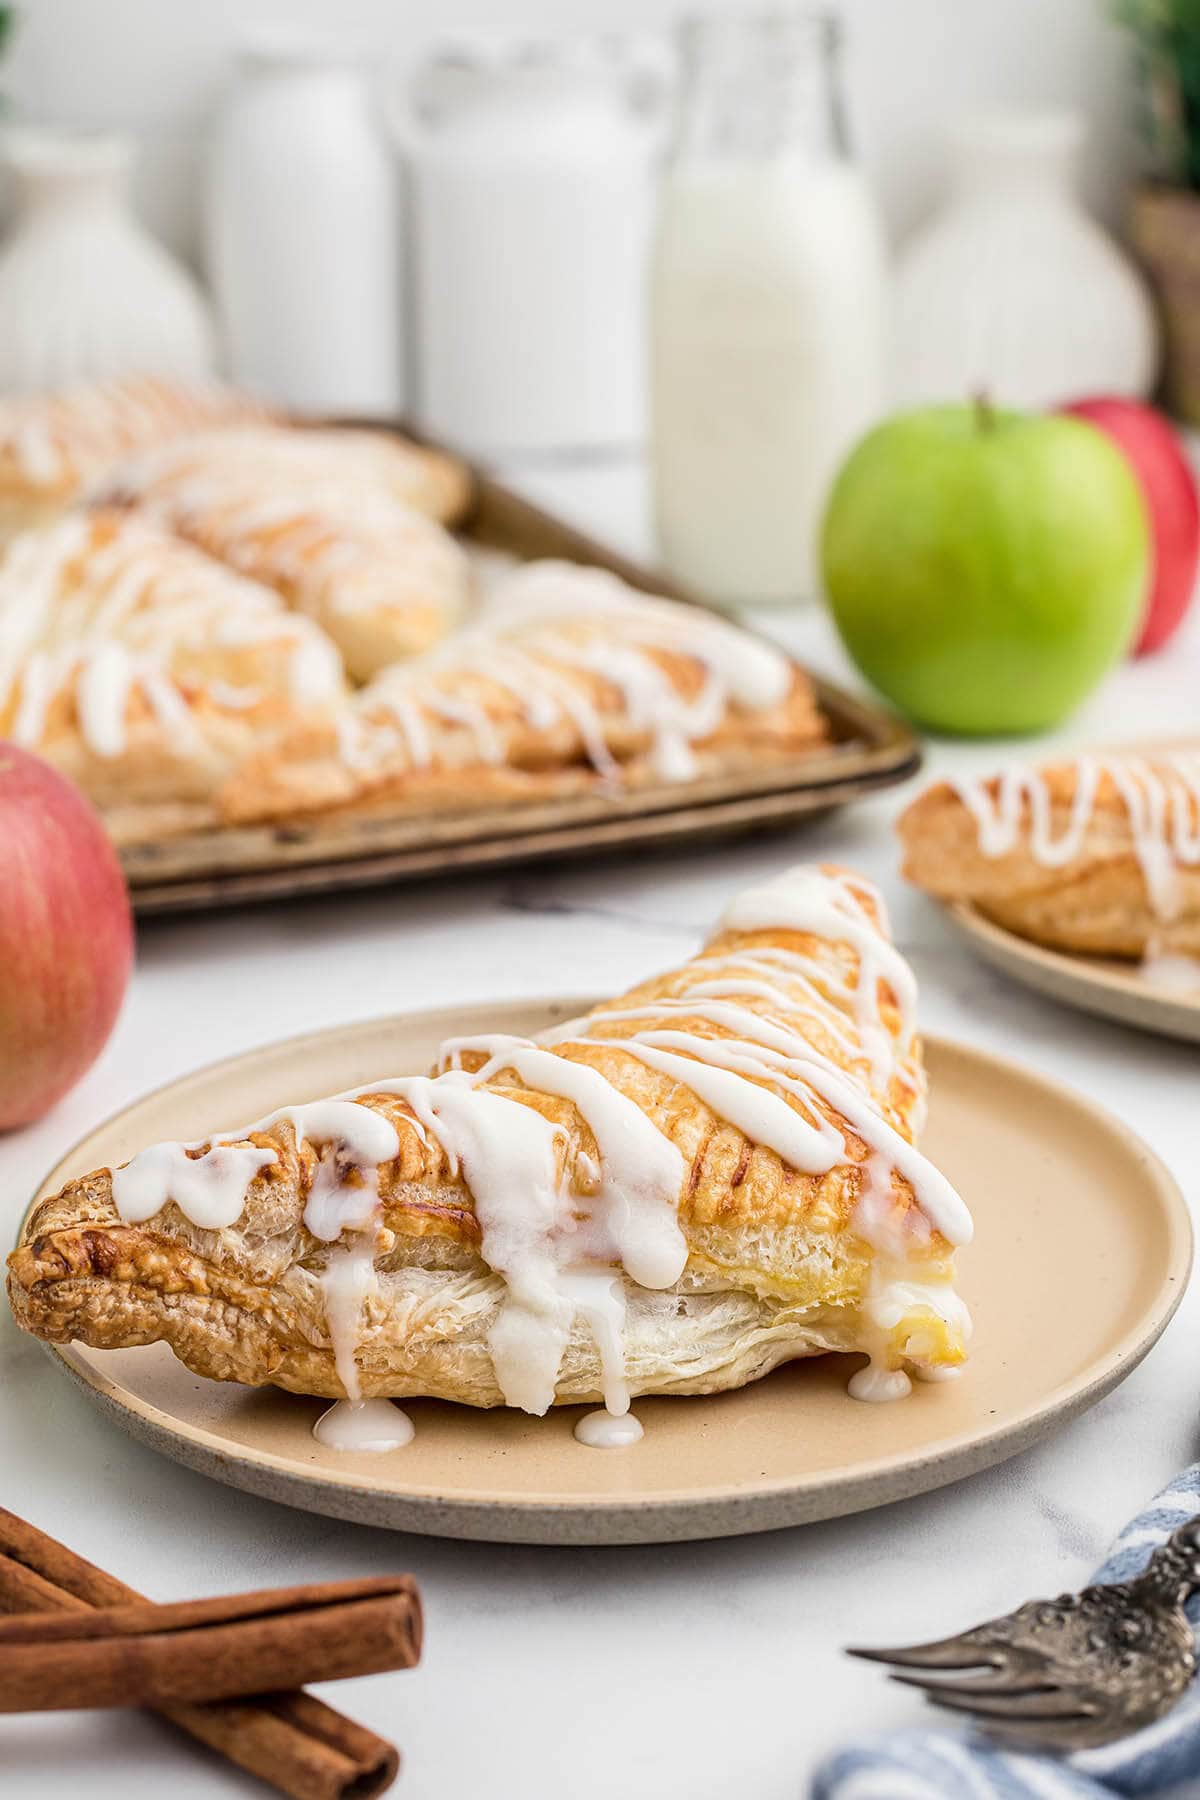 Apple hand pie on a plate dripping with icing.